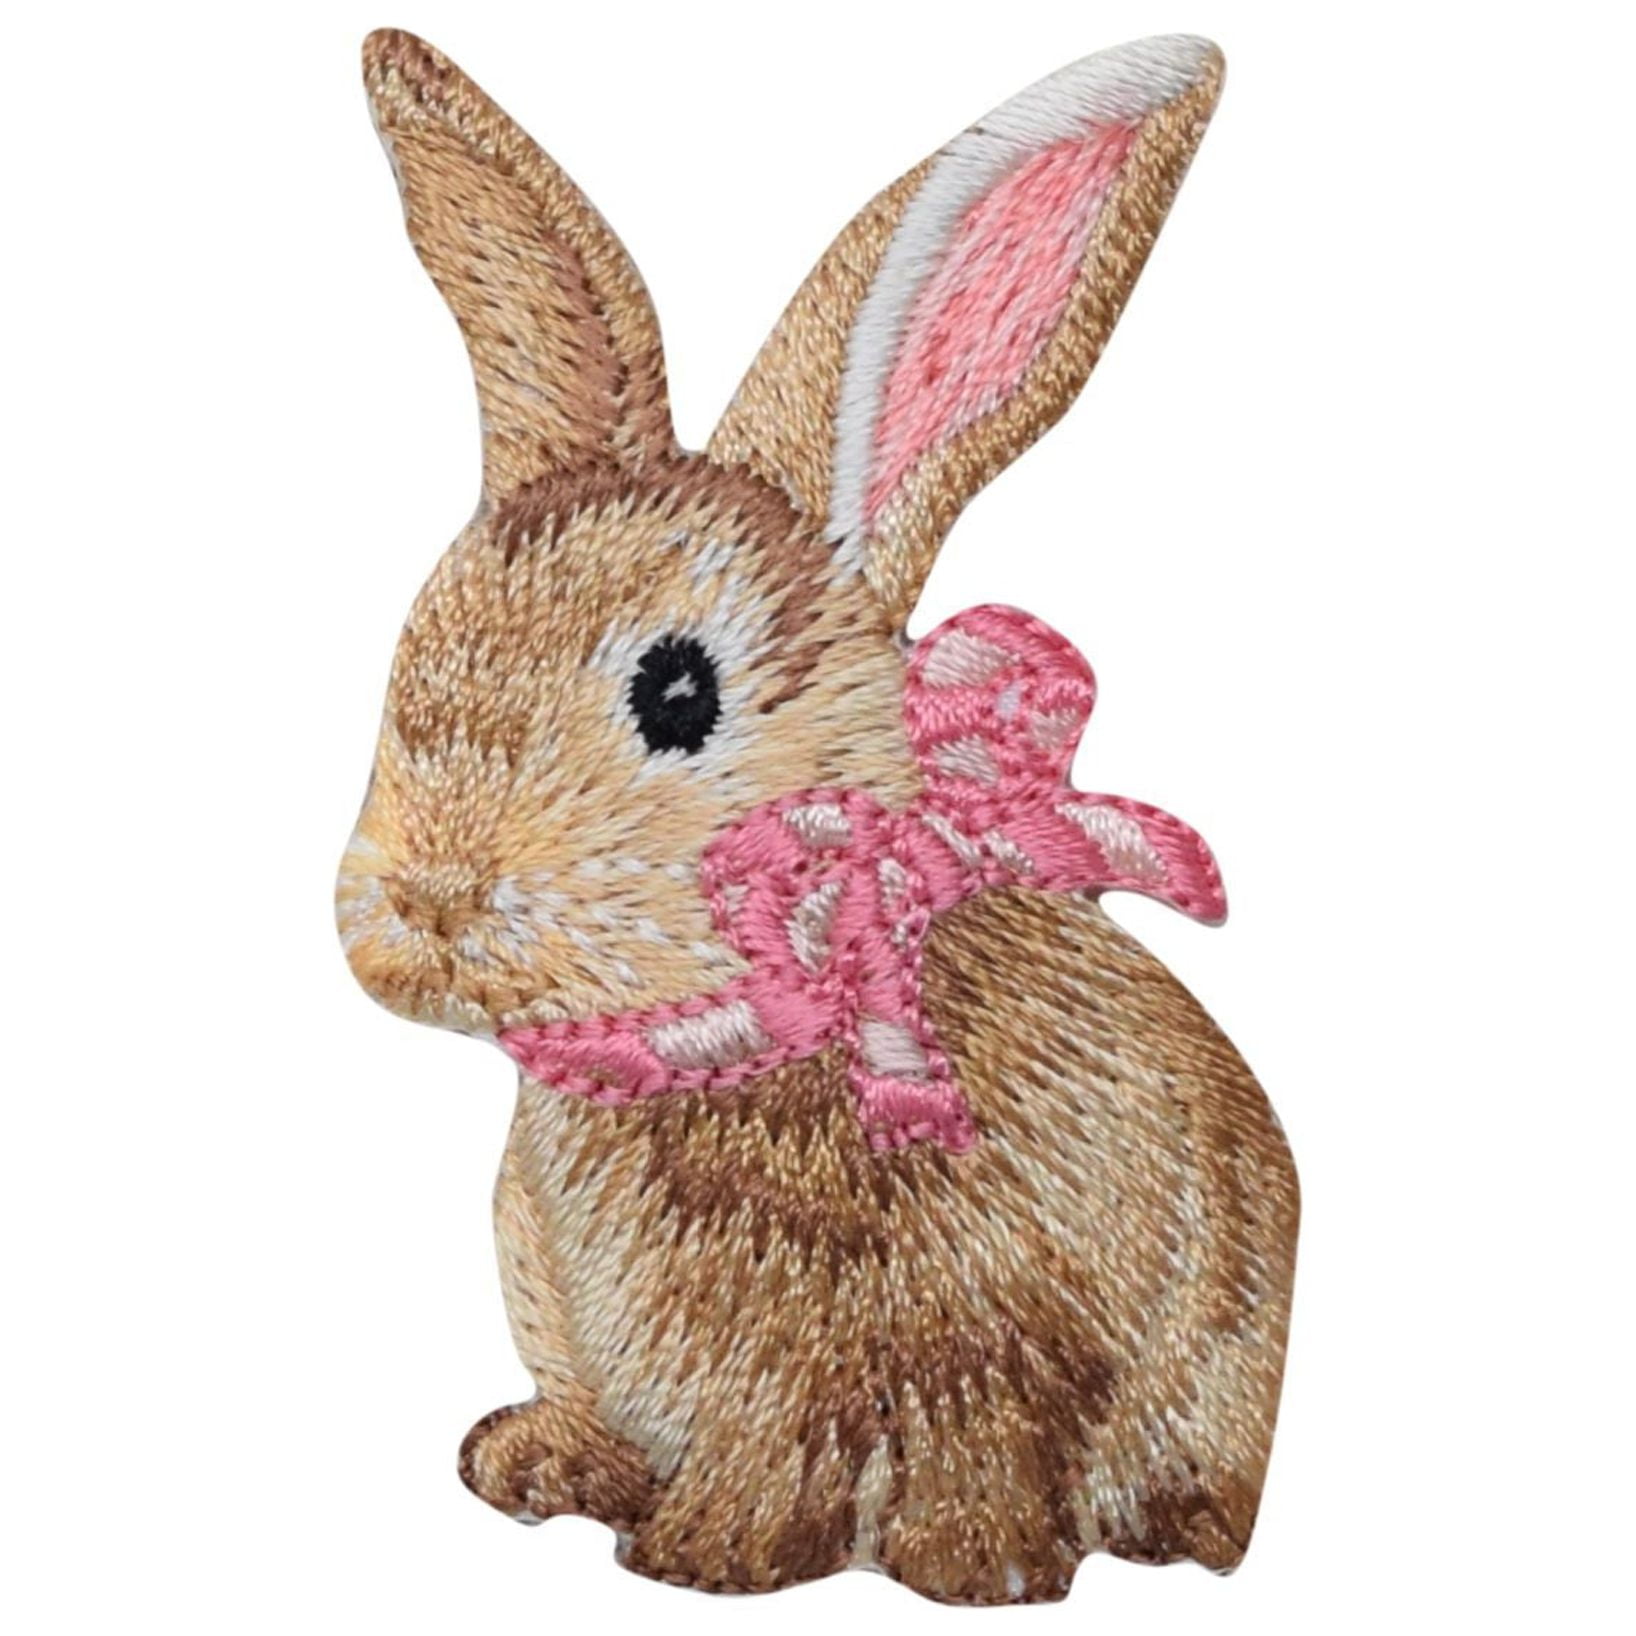 Bunny Rabbit - Hare - Pink Bow - Iron on Applique/ Embroidered